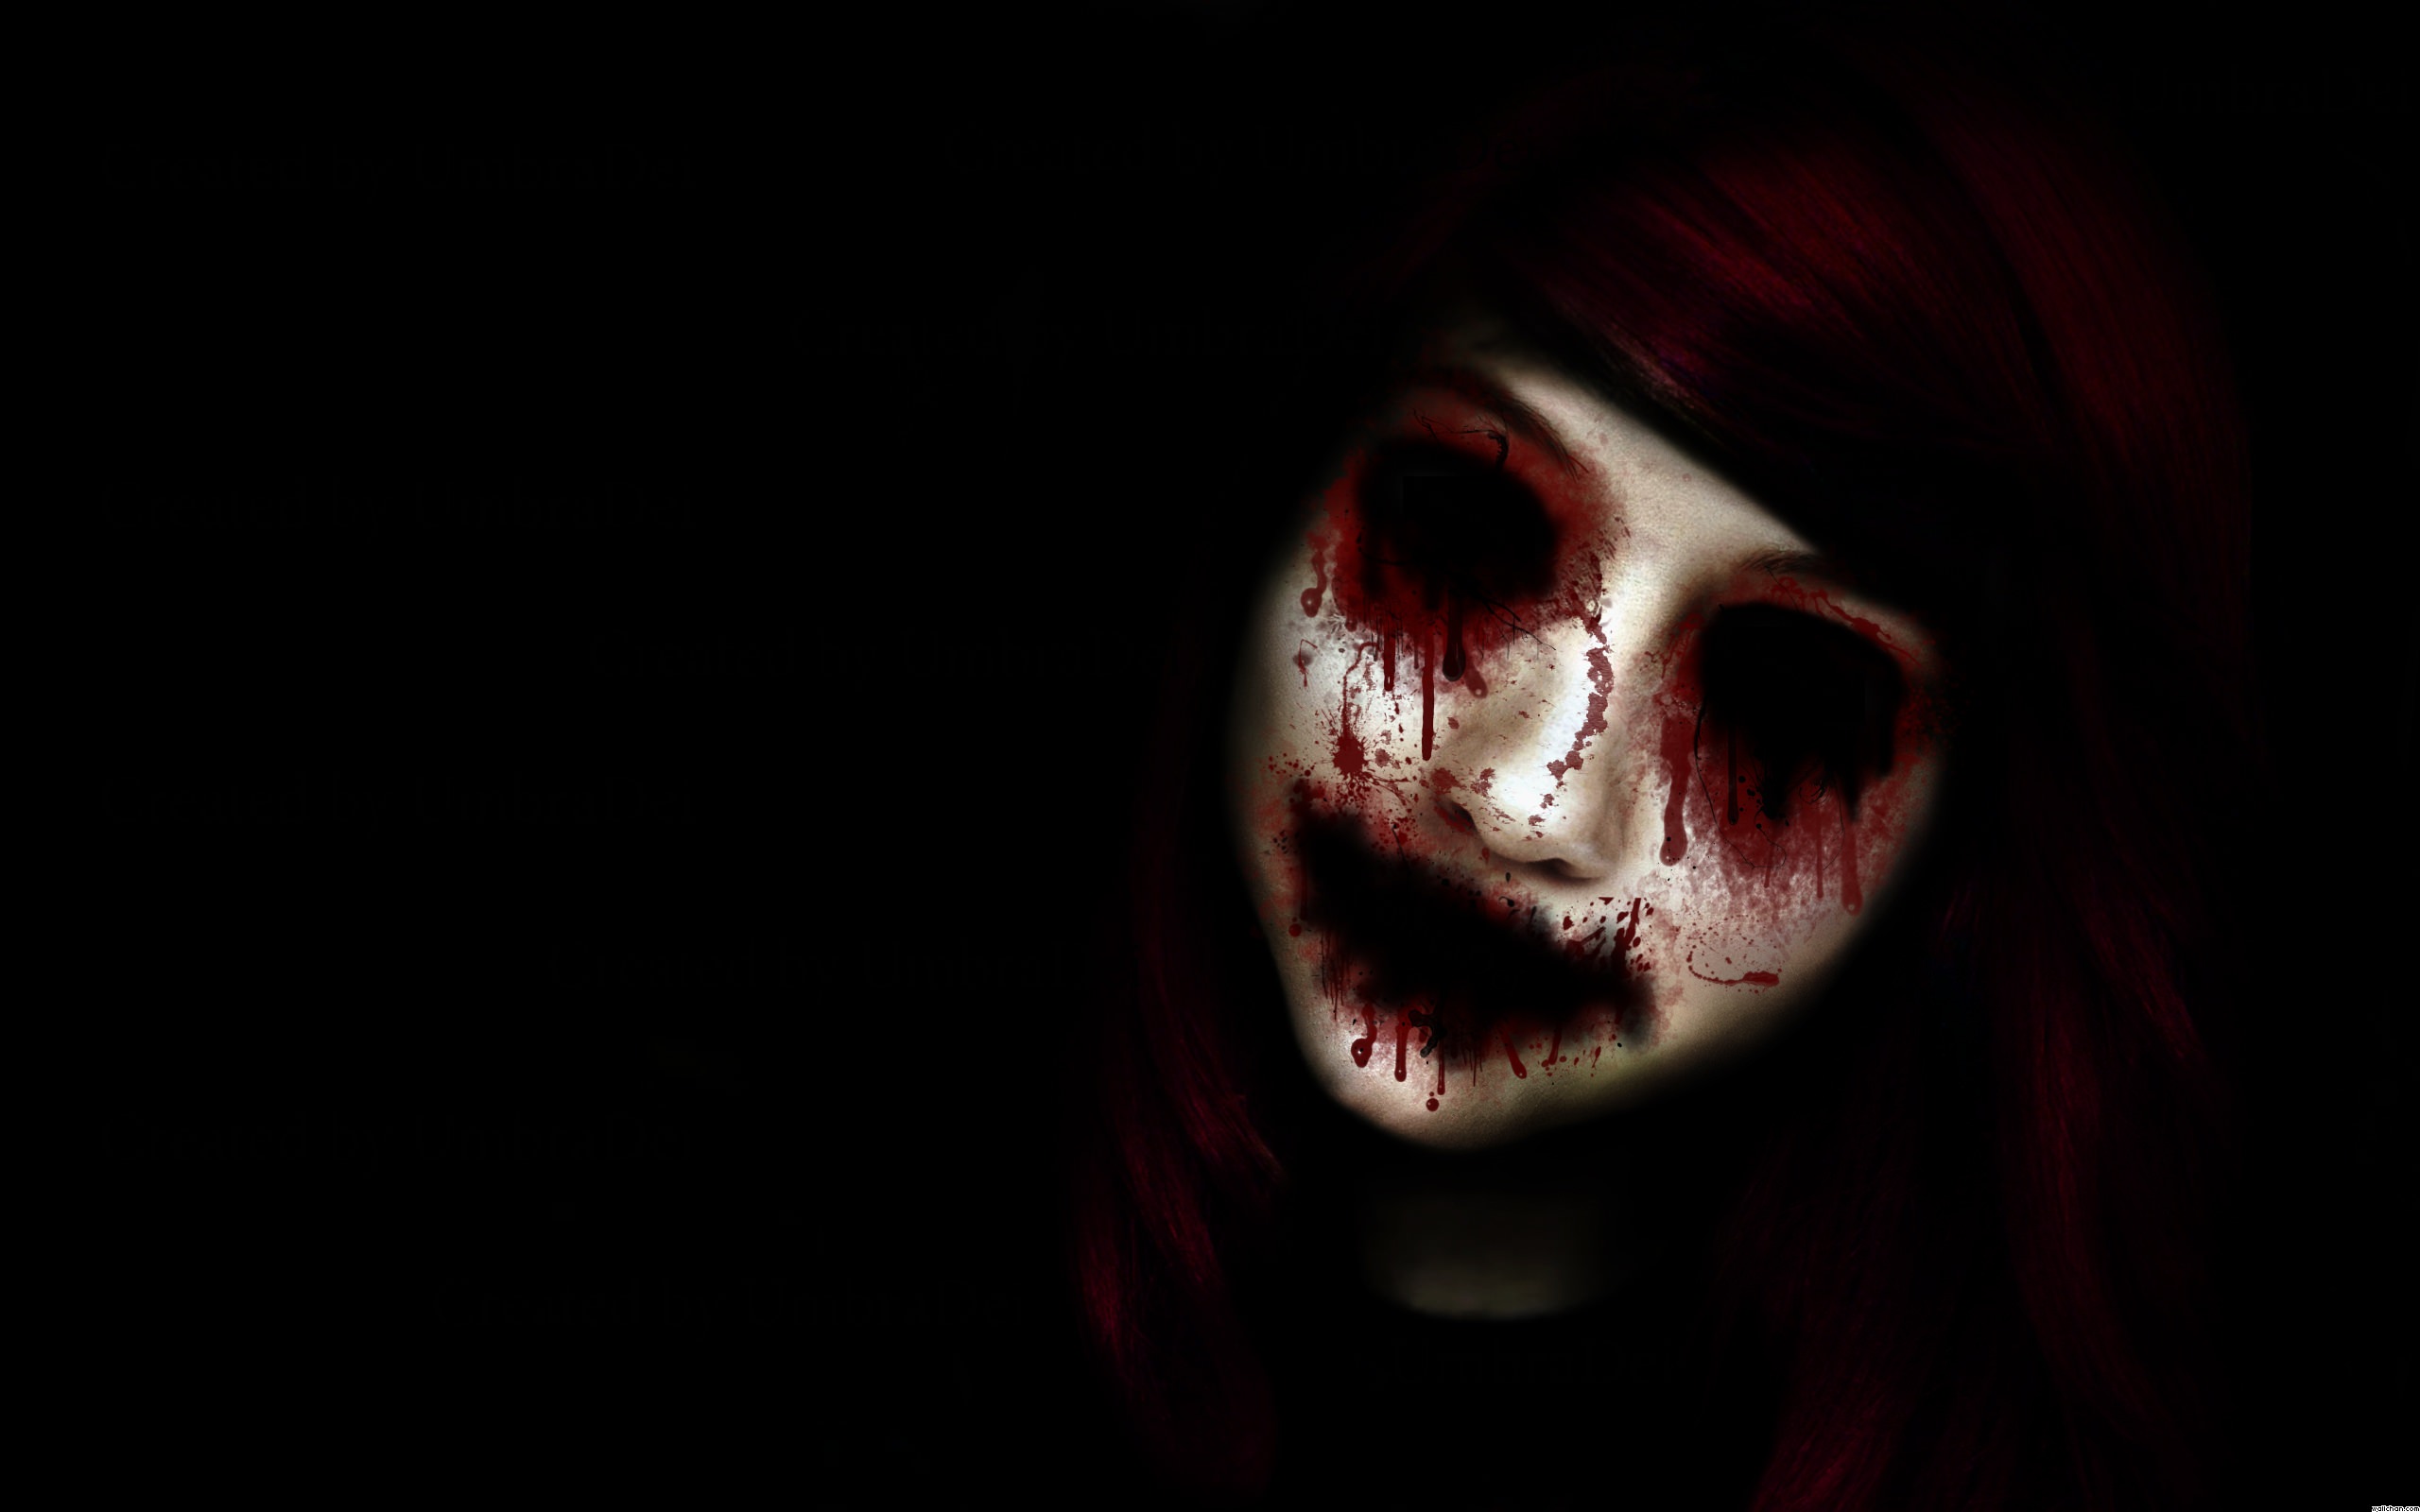 Creepy Wallpaper Scary Background Image Pictures